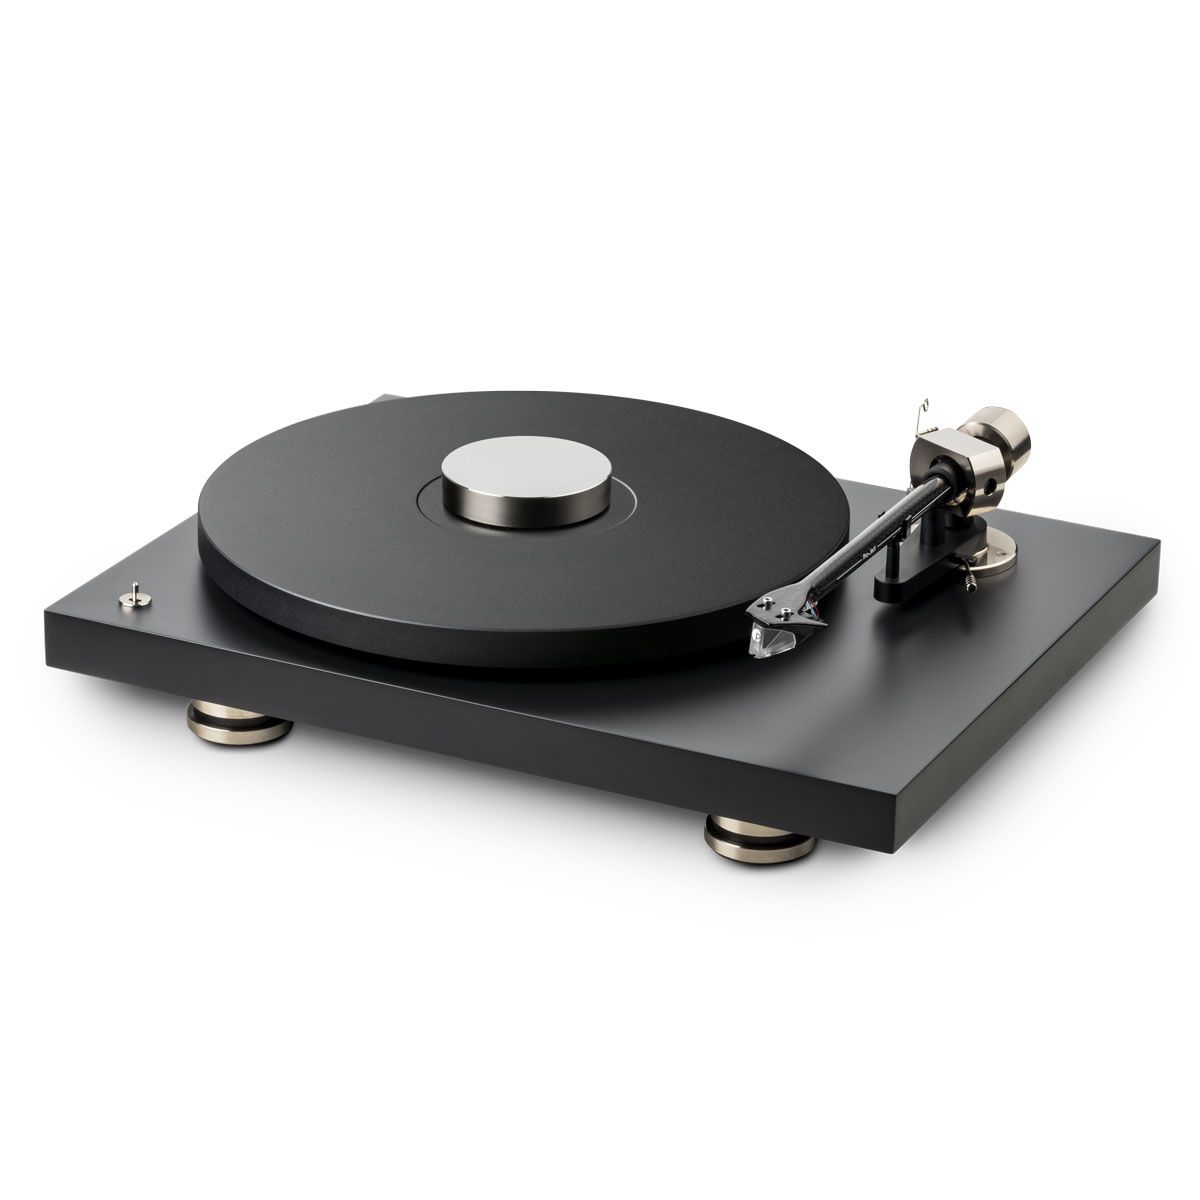 Industrial Motorized Turntable, Large Stainless Steel